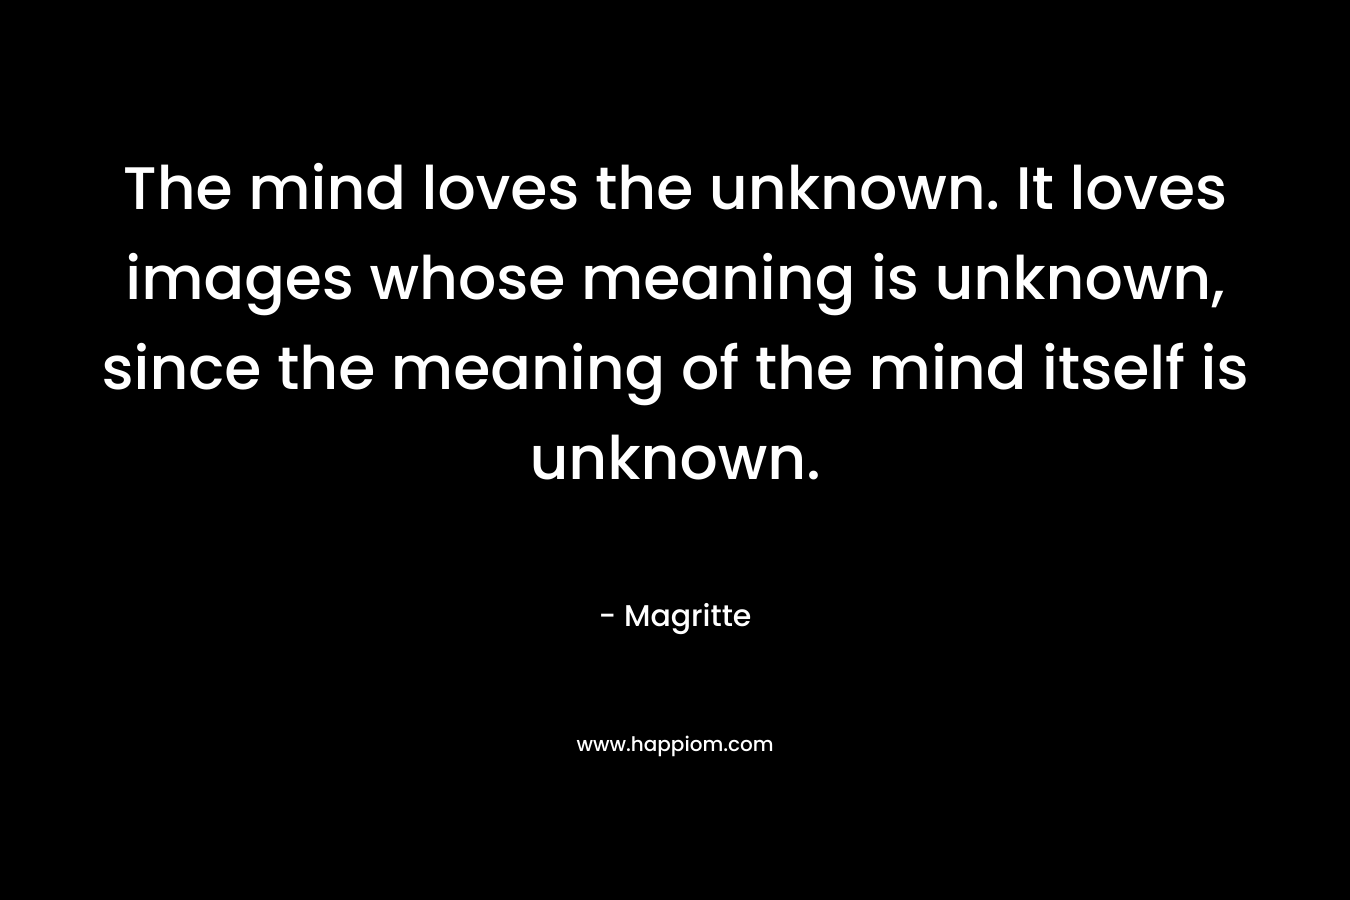 The mind loves the unknown. It loves images whose meaning is unknown, since the meaning of the mind itself is unknown.